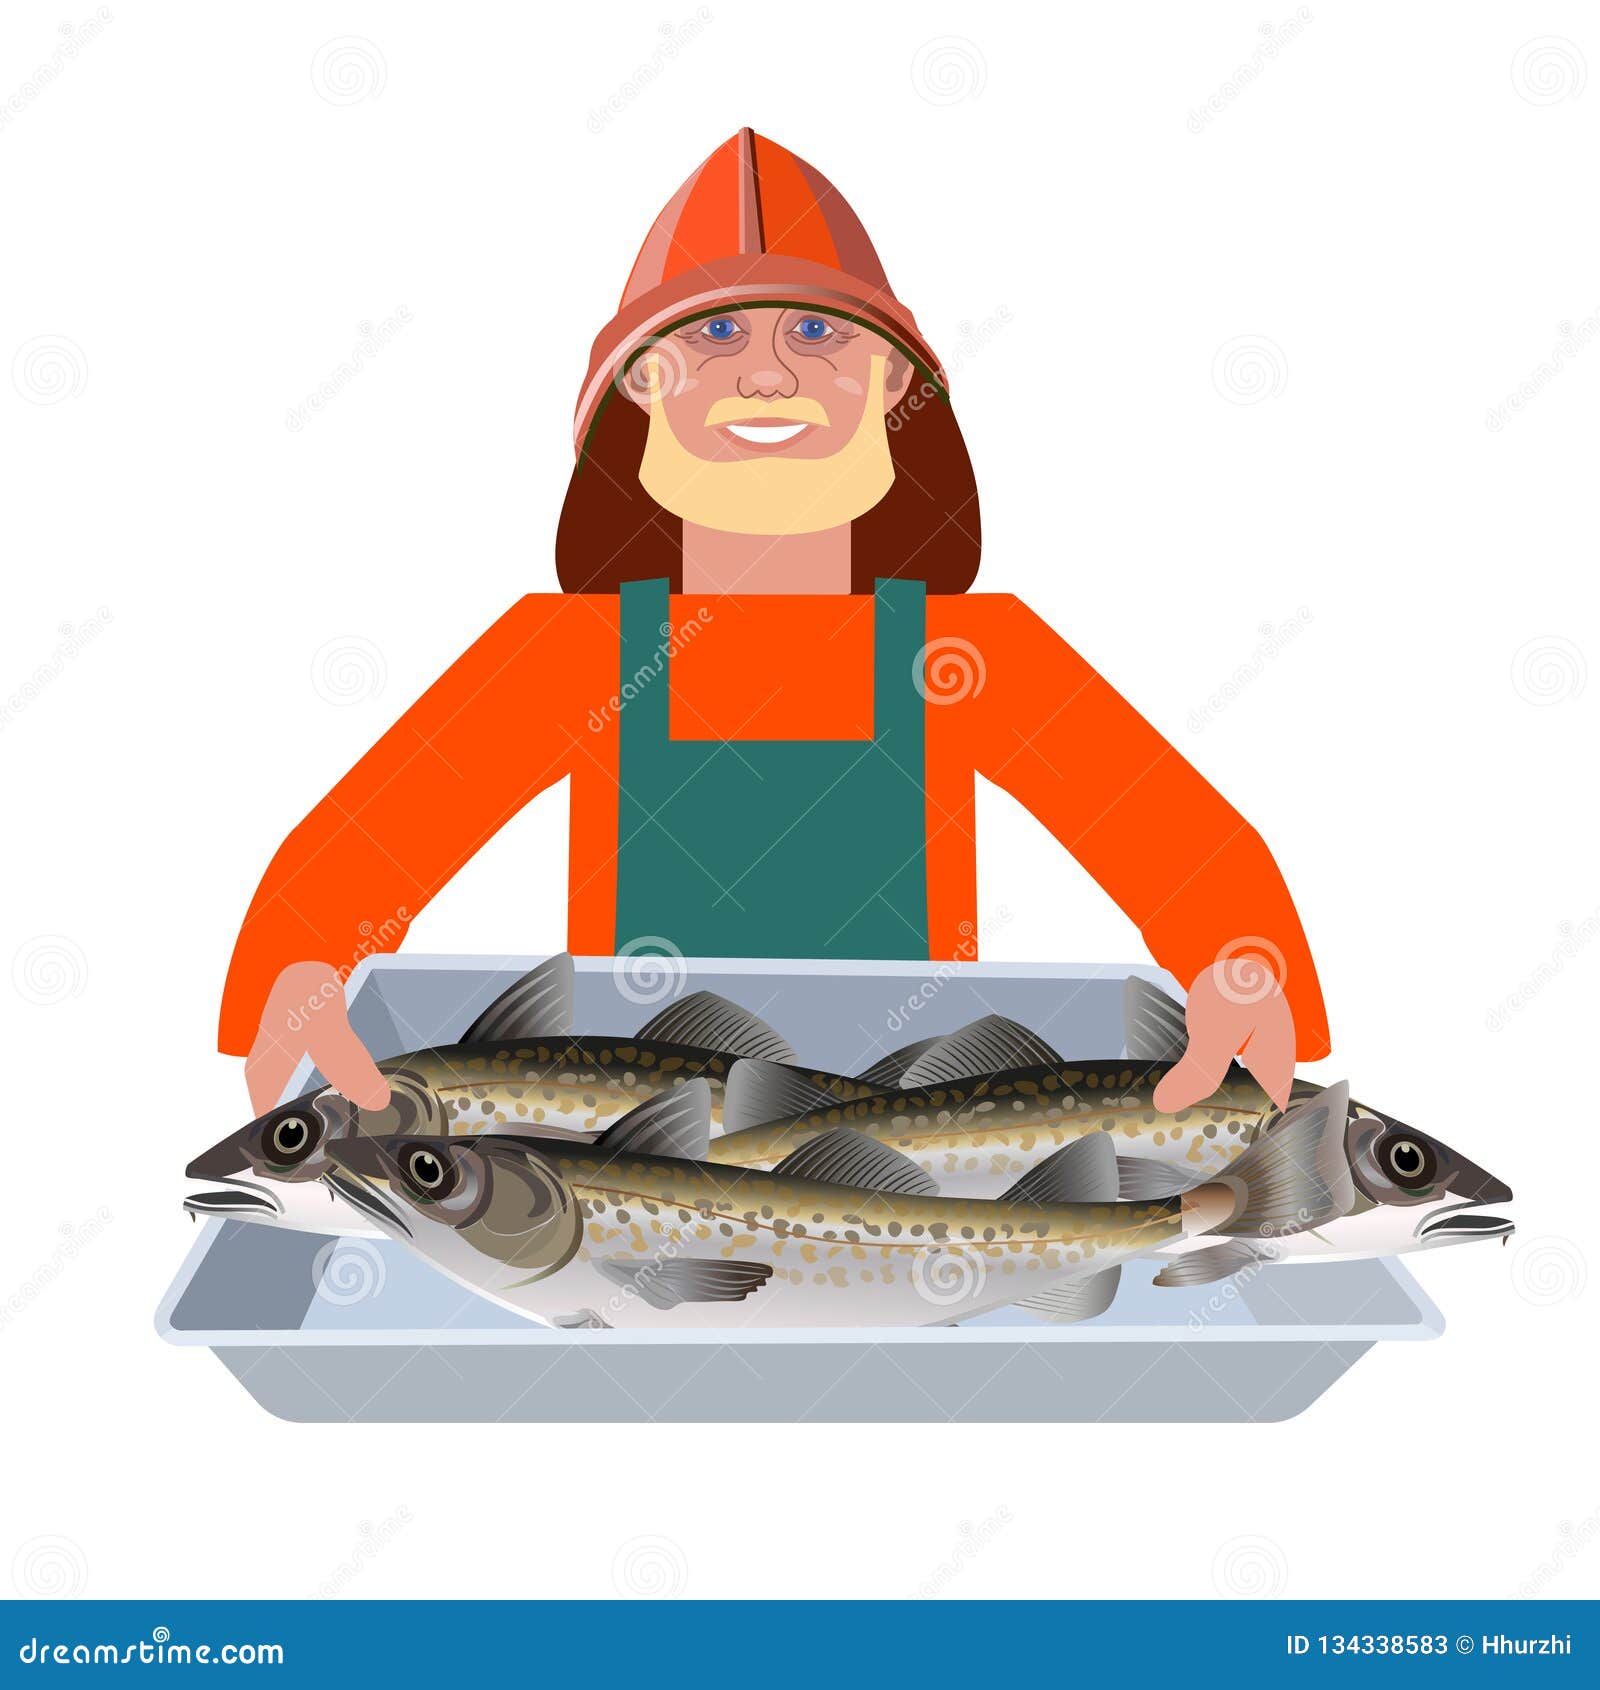 https://thumbs.dreamstime.com/z/man-fish-container-man-holding-fish-container-vector-illustration-isolated-white-background-134338583.jpg